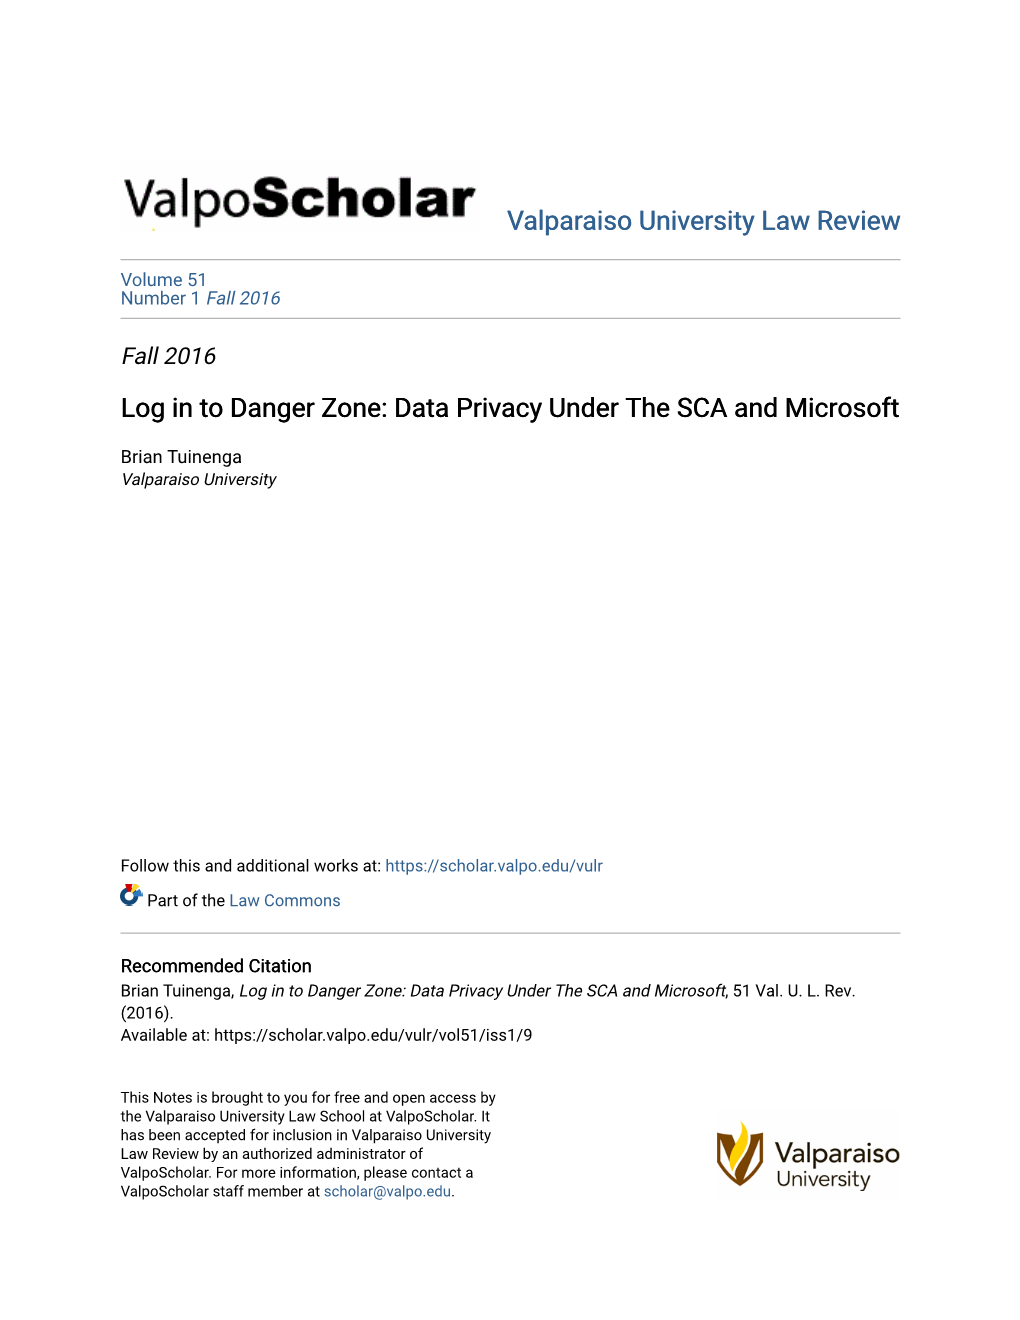 Data Privacy Under the SCA and Microsoft